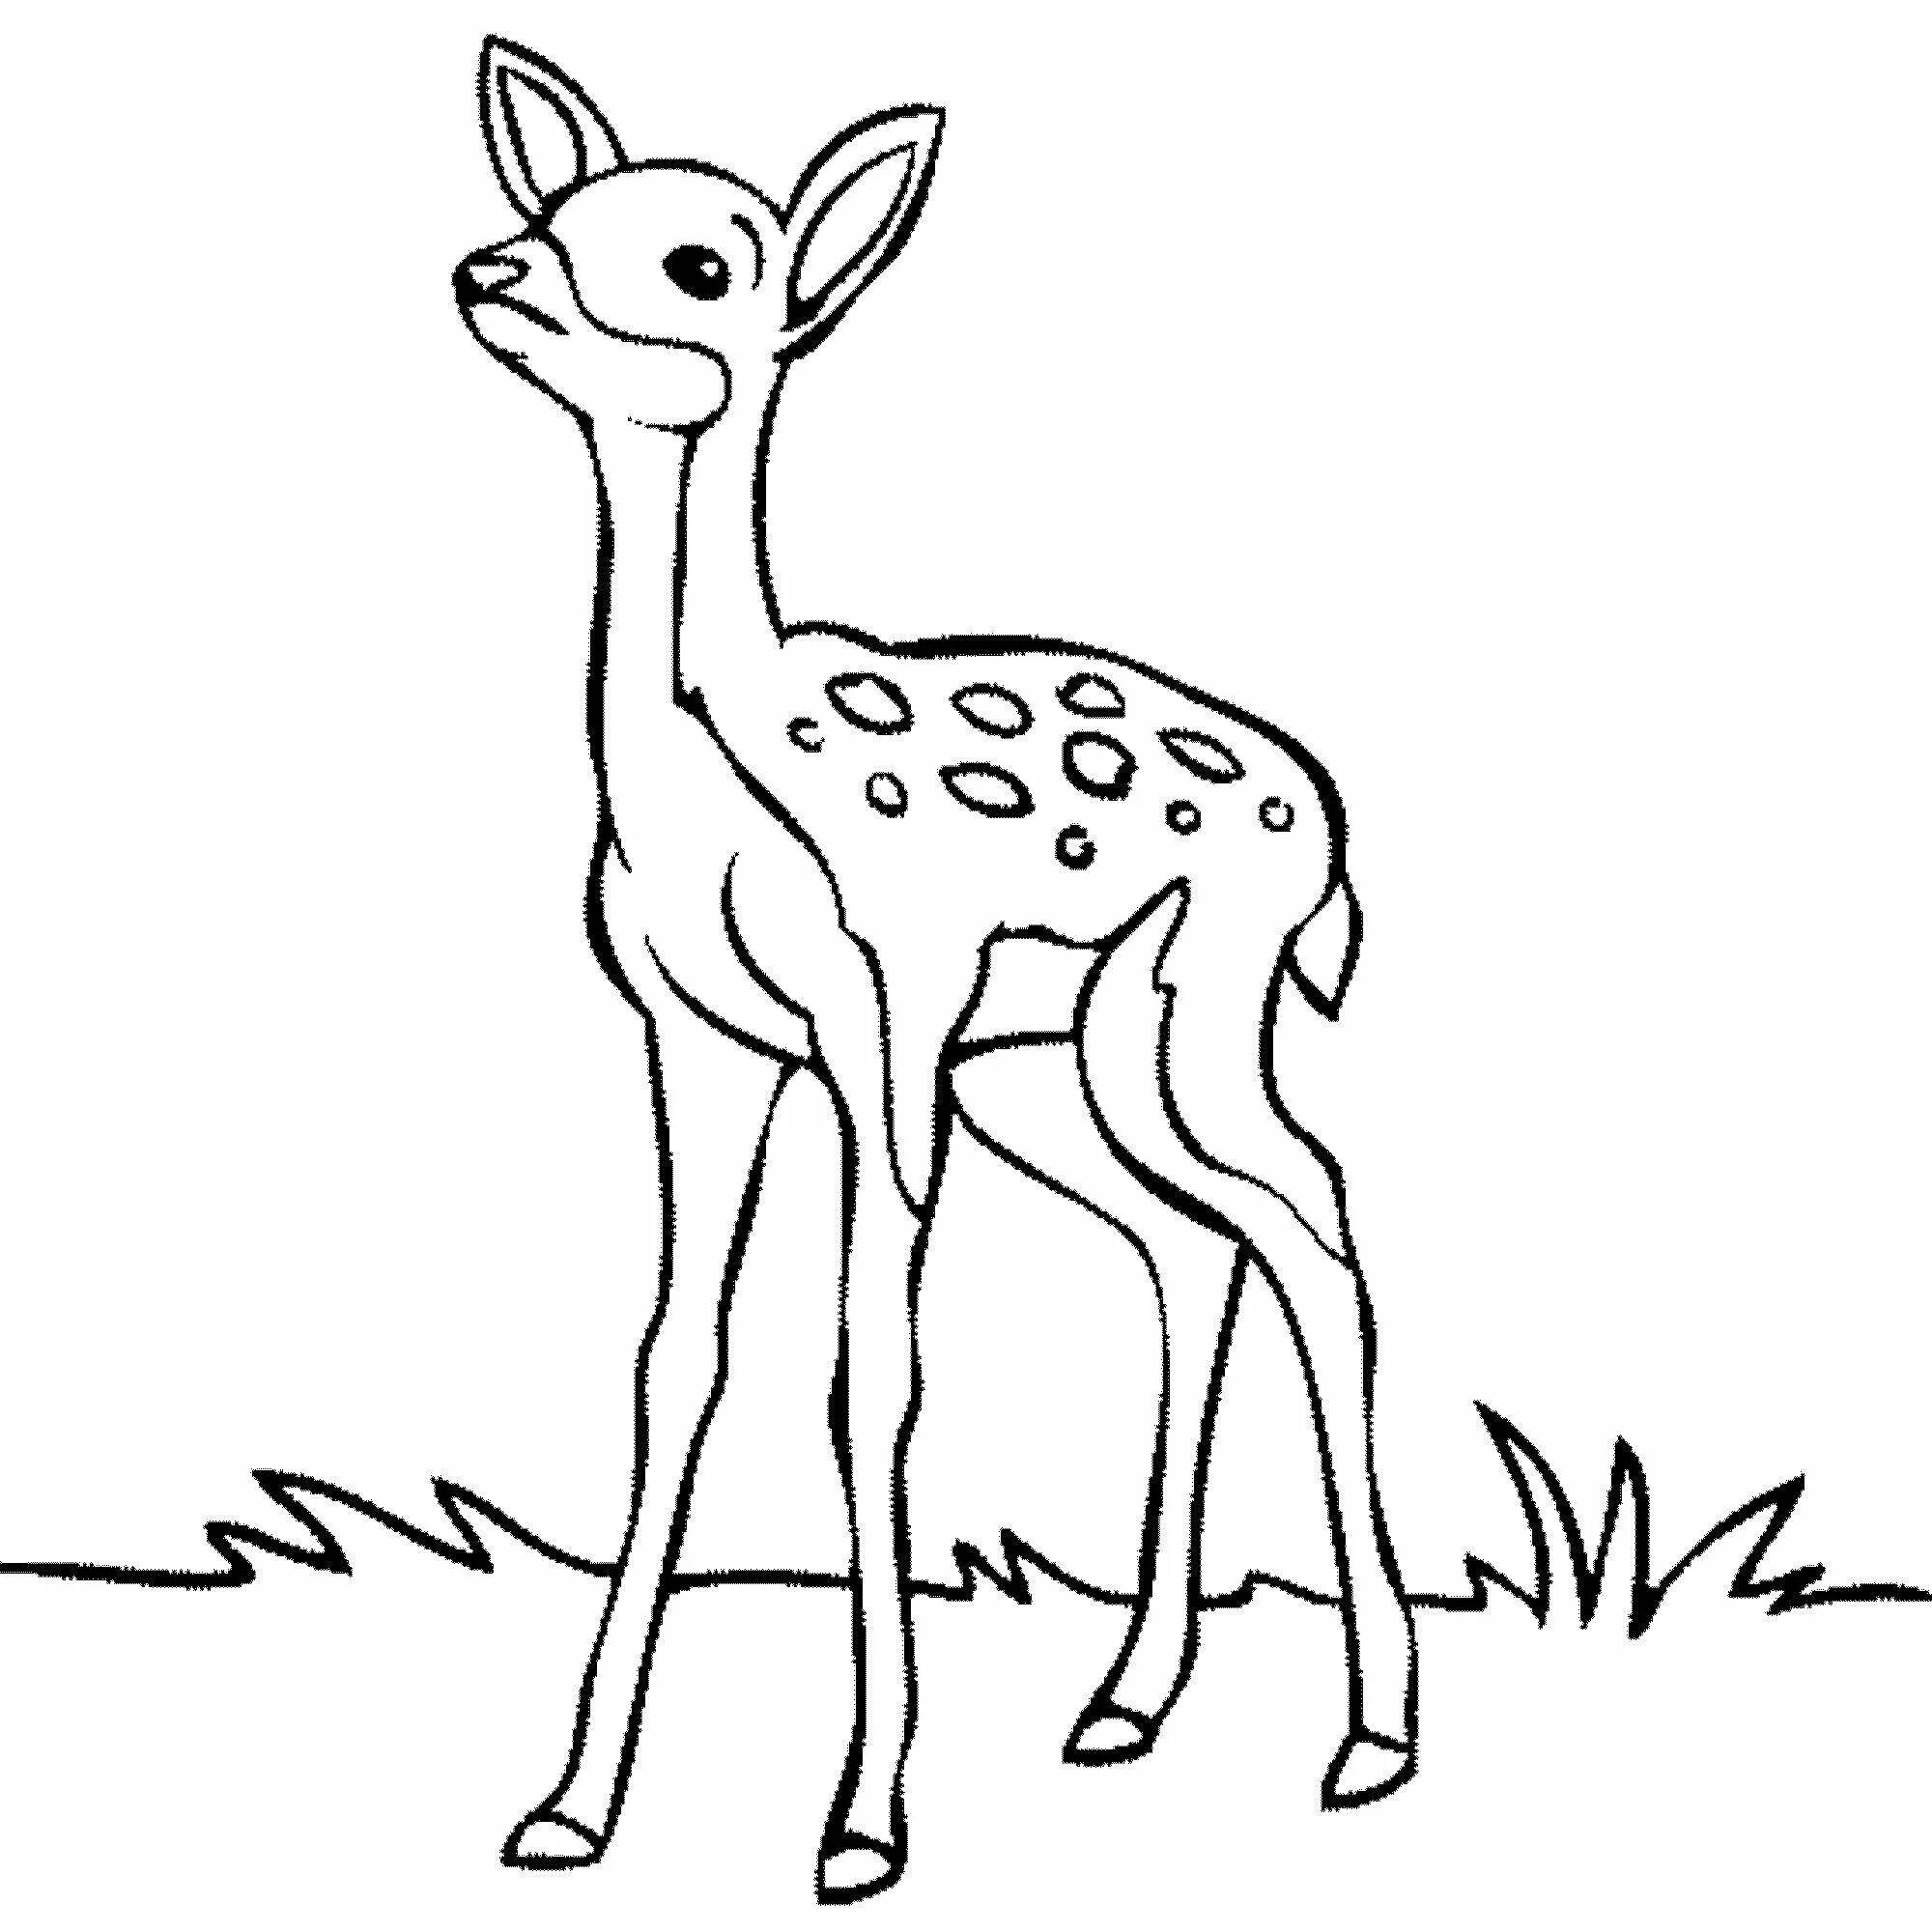 Awesome deer coloring pages for kids